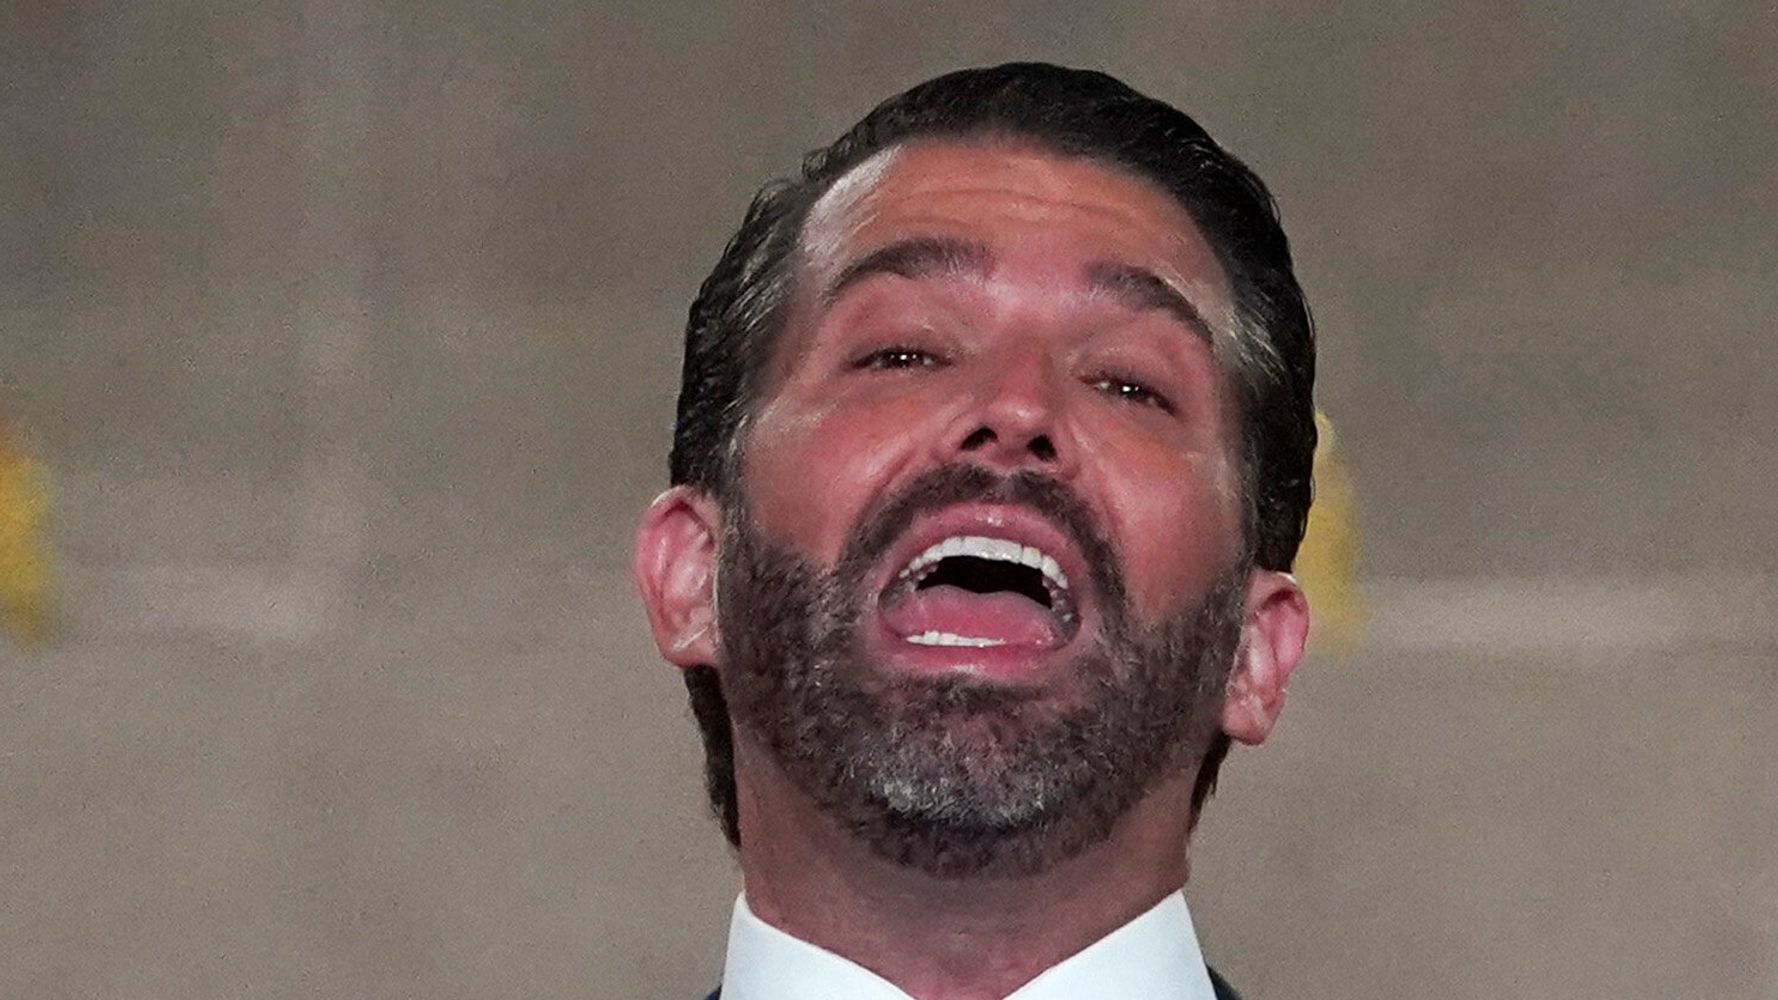 RNC Reportedly Dropped $300,000 To Buy Donald Trump Jr.'s Latest Book